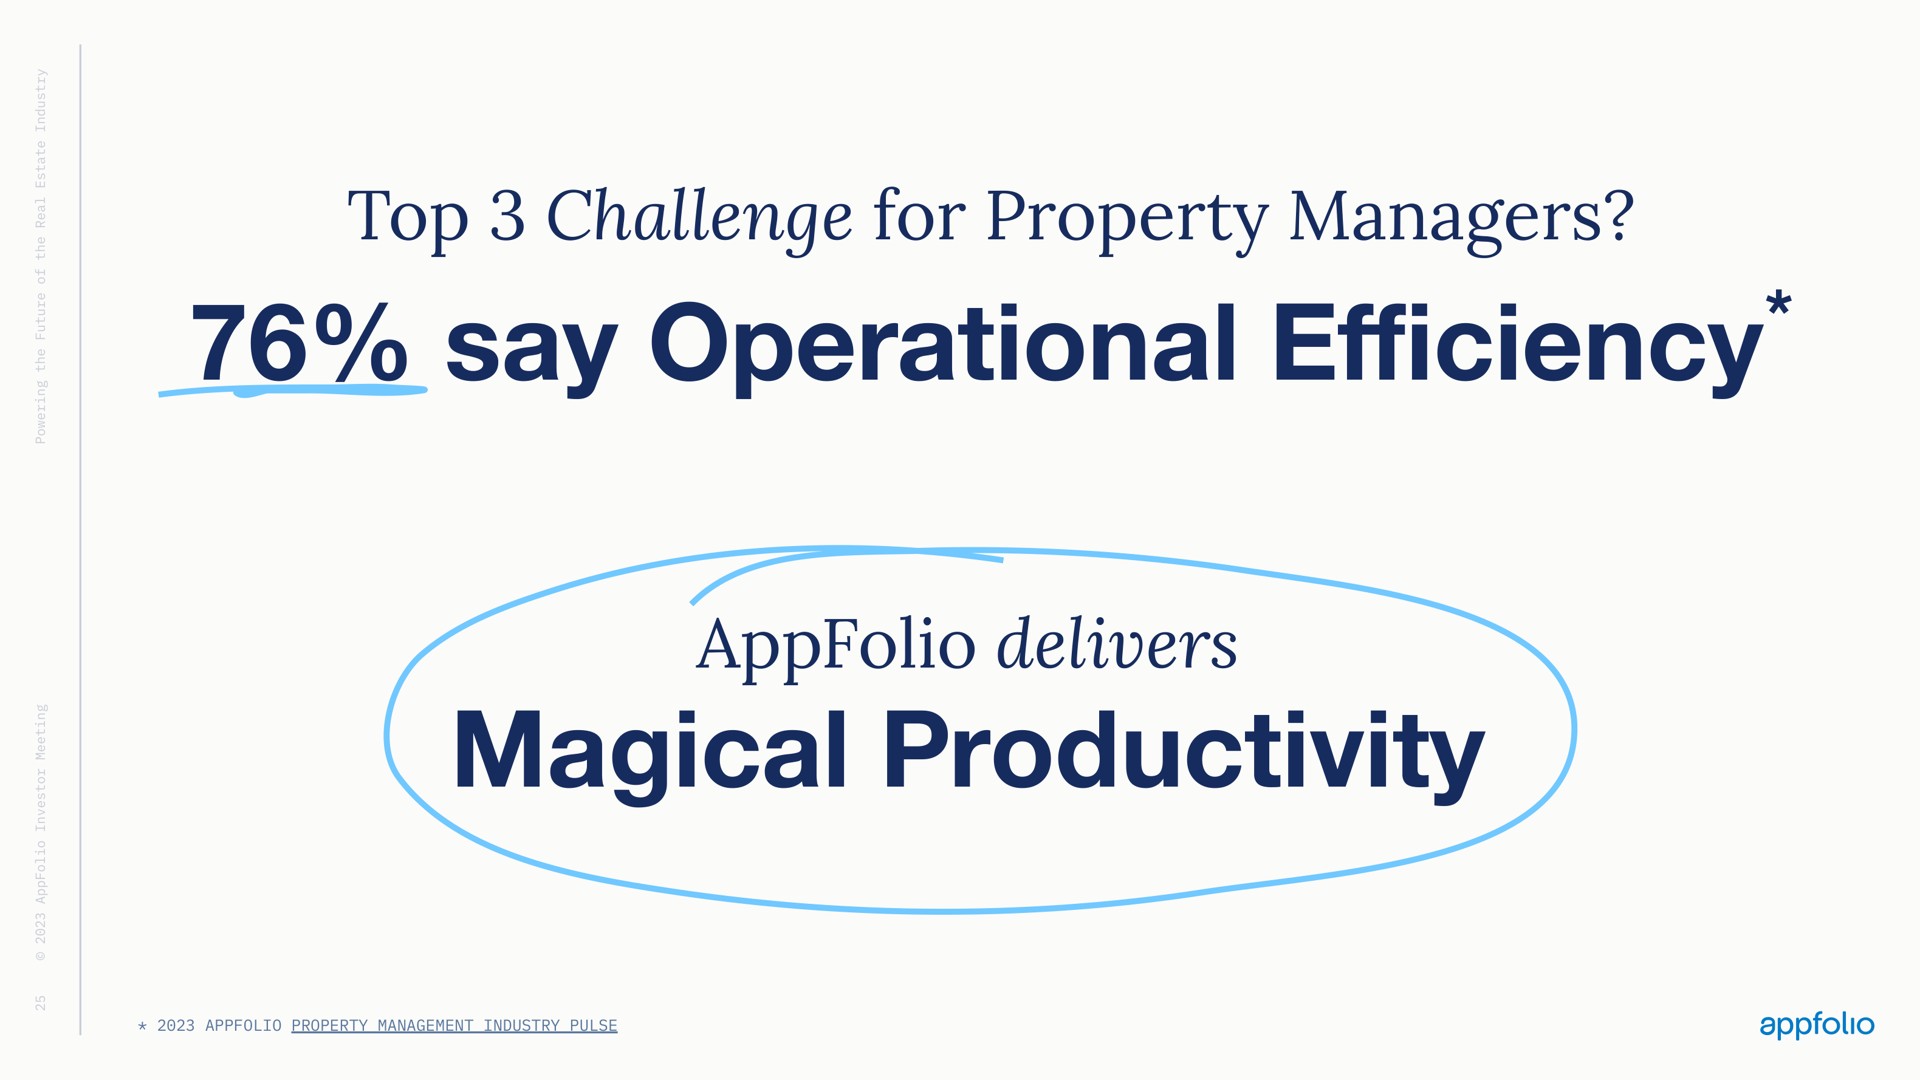 top challenge for property managers say operational delivers magical productivity efficiency | AppFolio